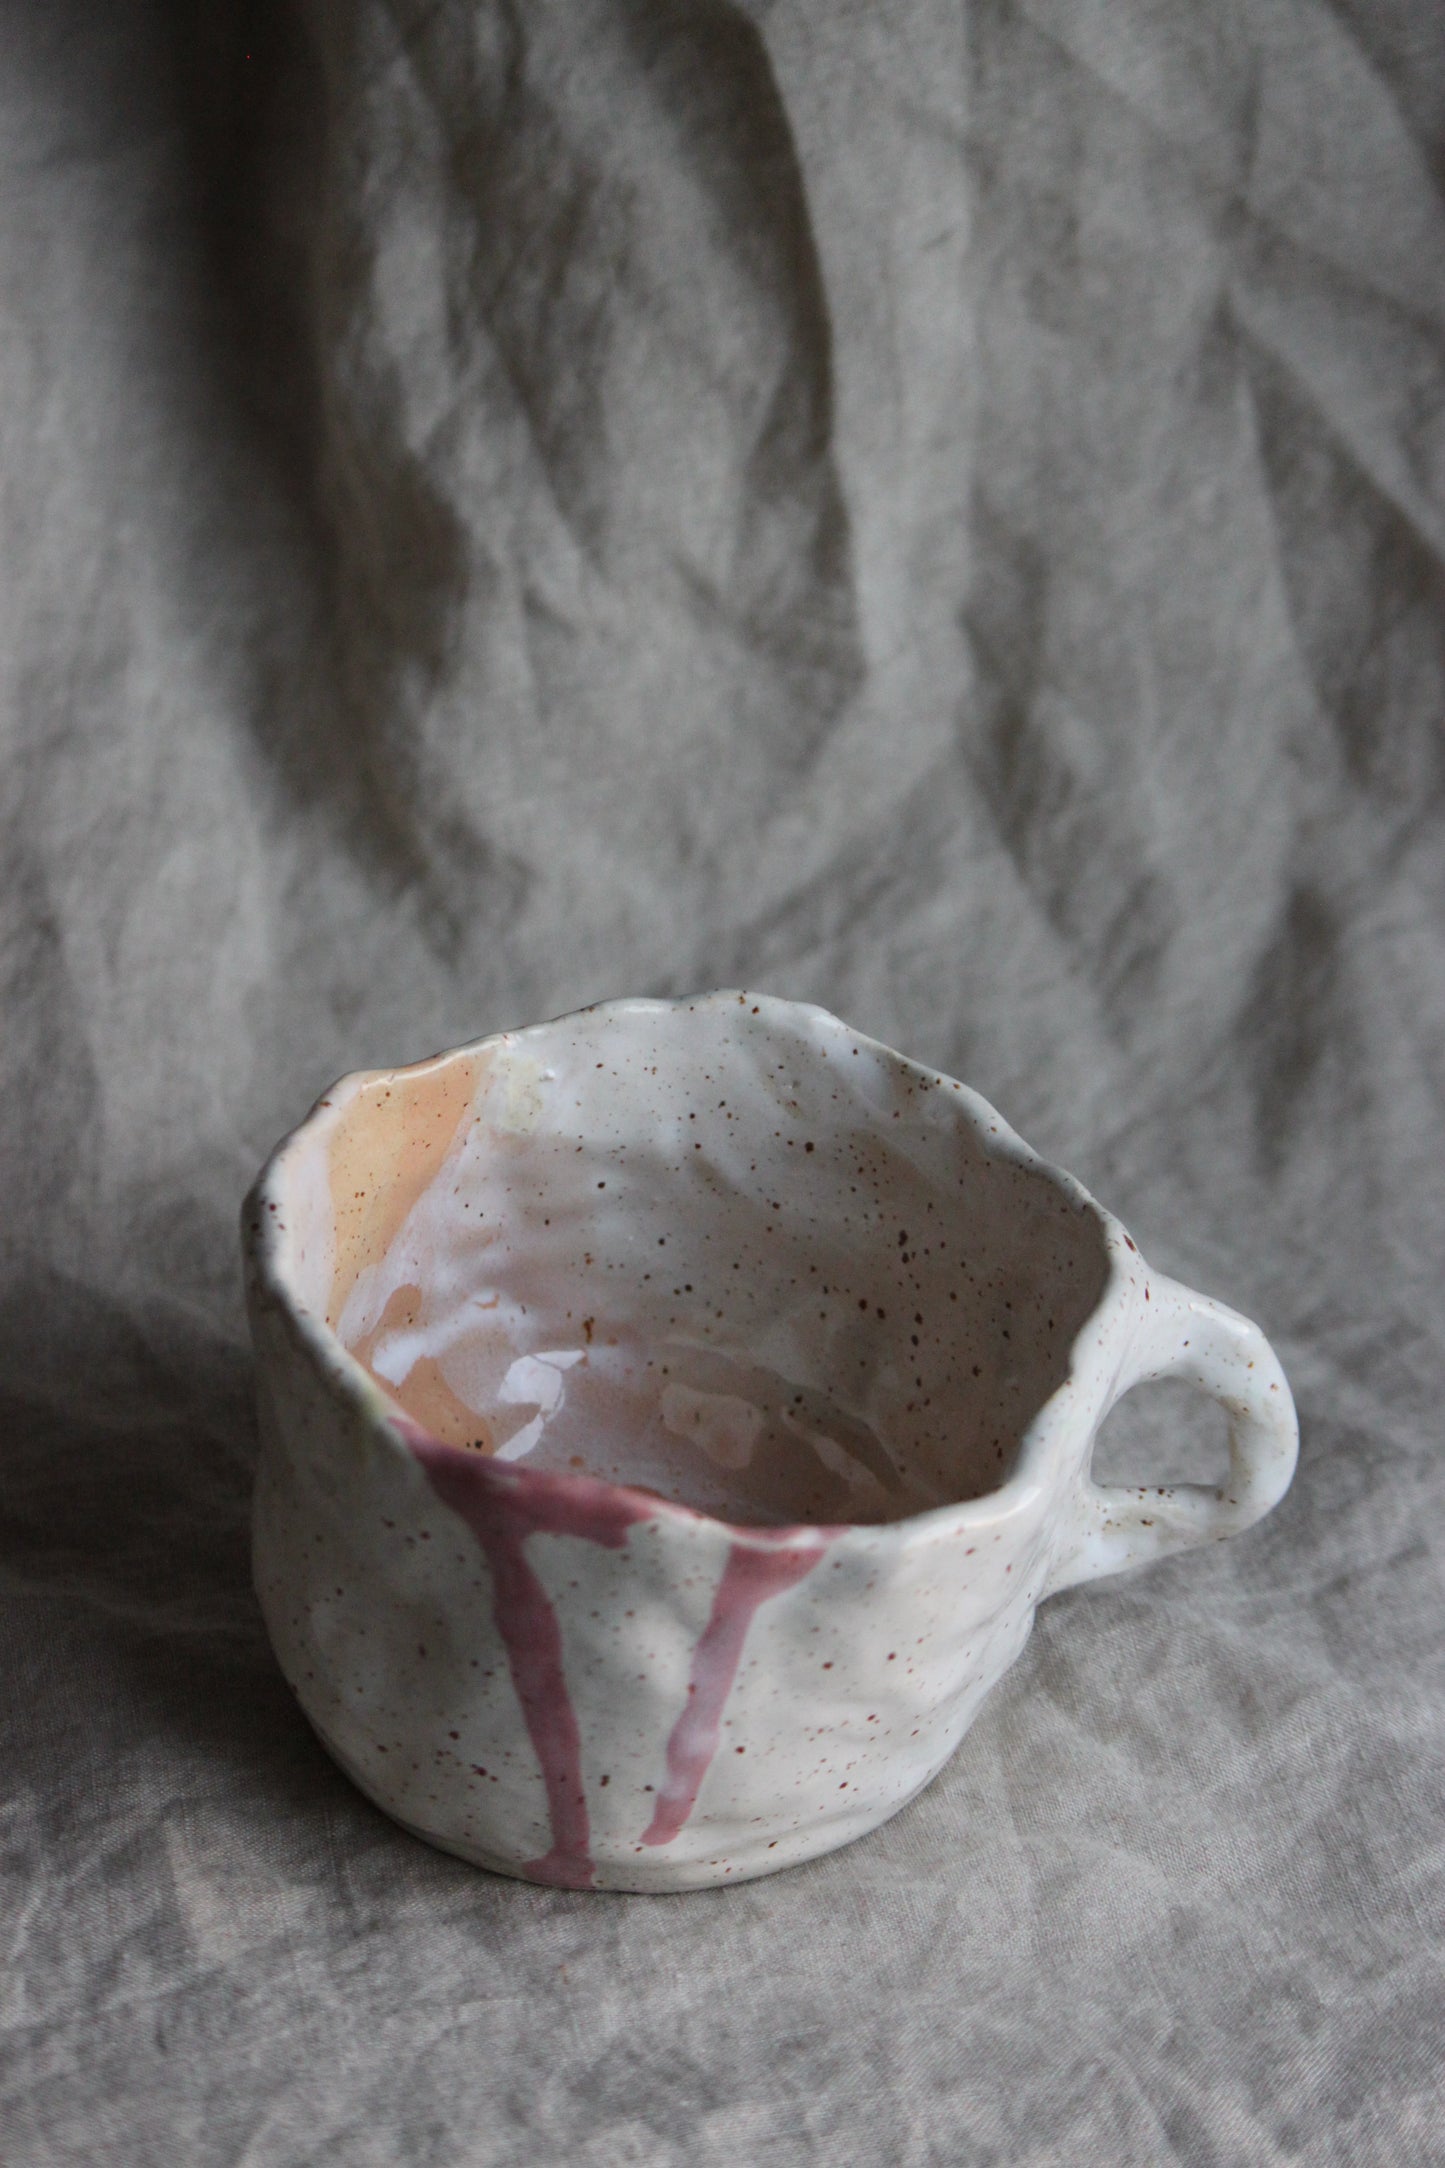 We are all mad here cup/bowl no.2